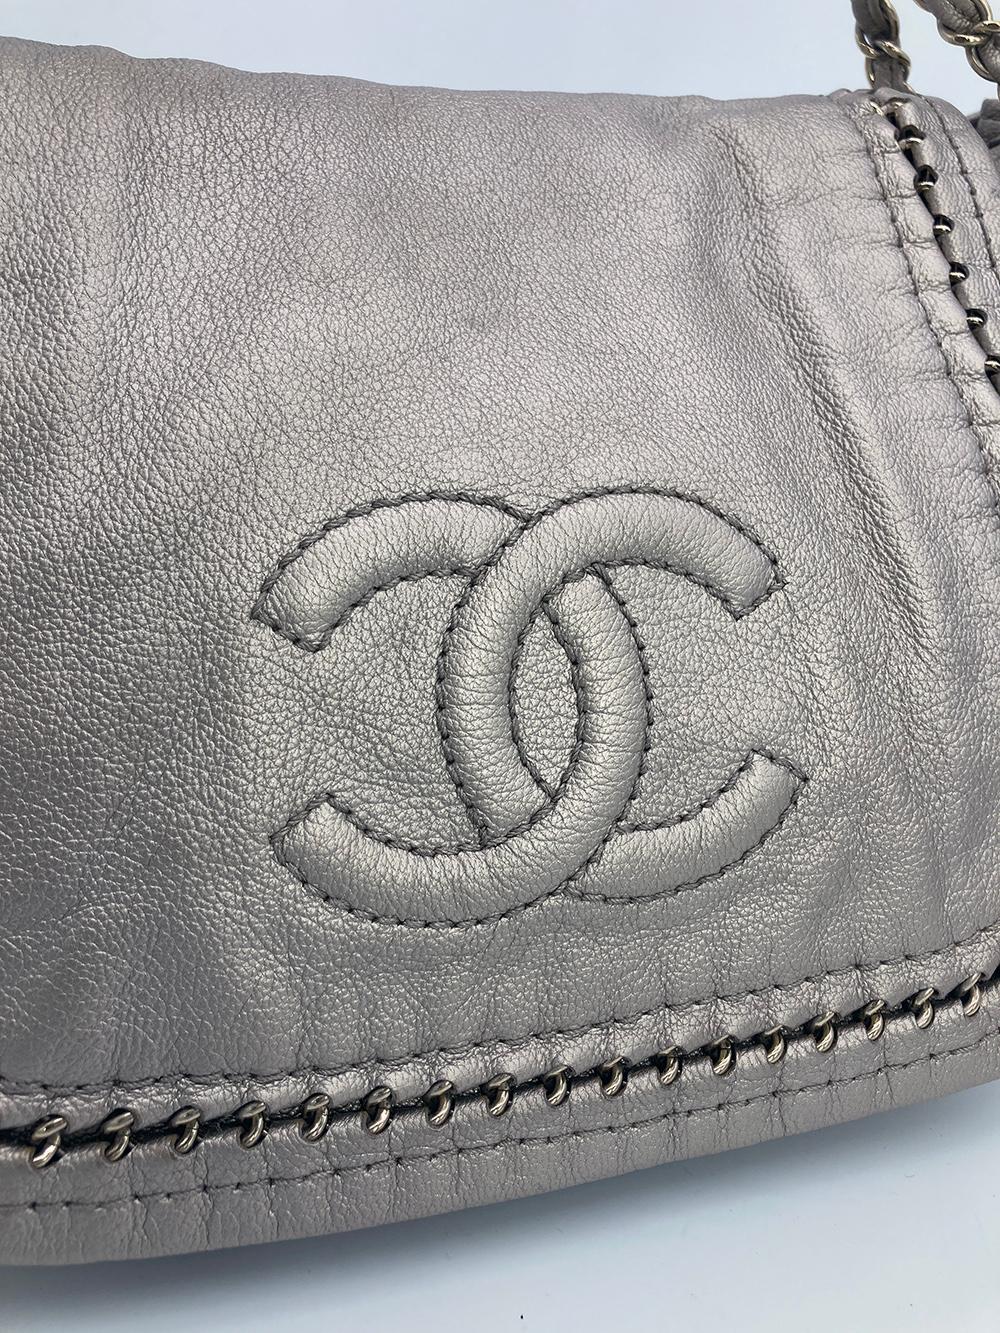 Chanel Champagne Timeless Accordion Flap Bag In Excellent Condition For Sale In Philadelphia, PA